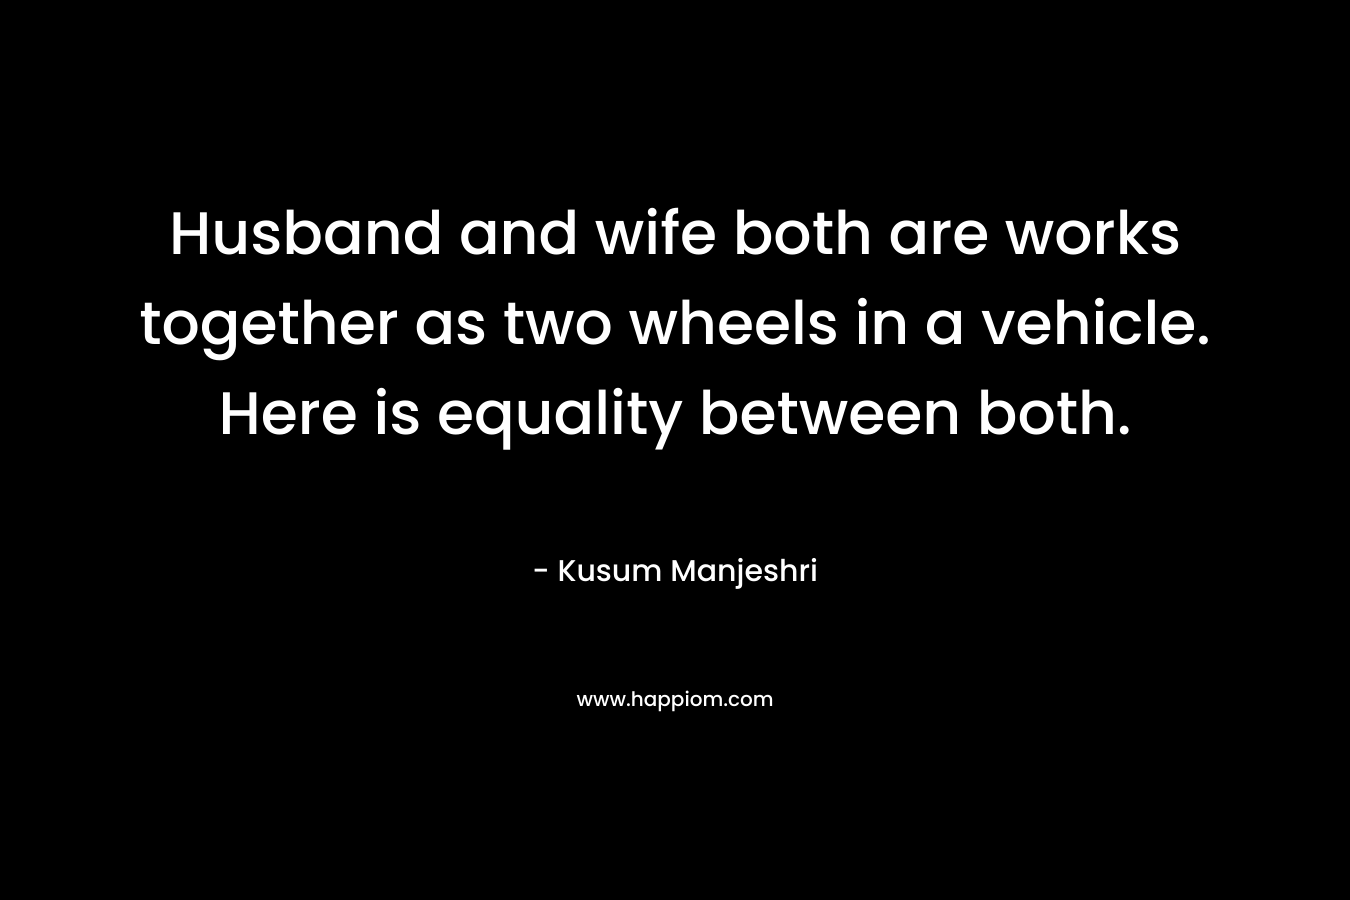 Husband and wife both are works together as two wheels in a vehicle. Here is equality between both.